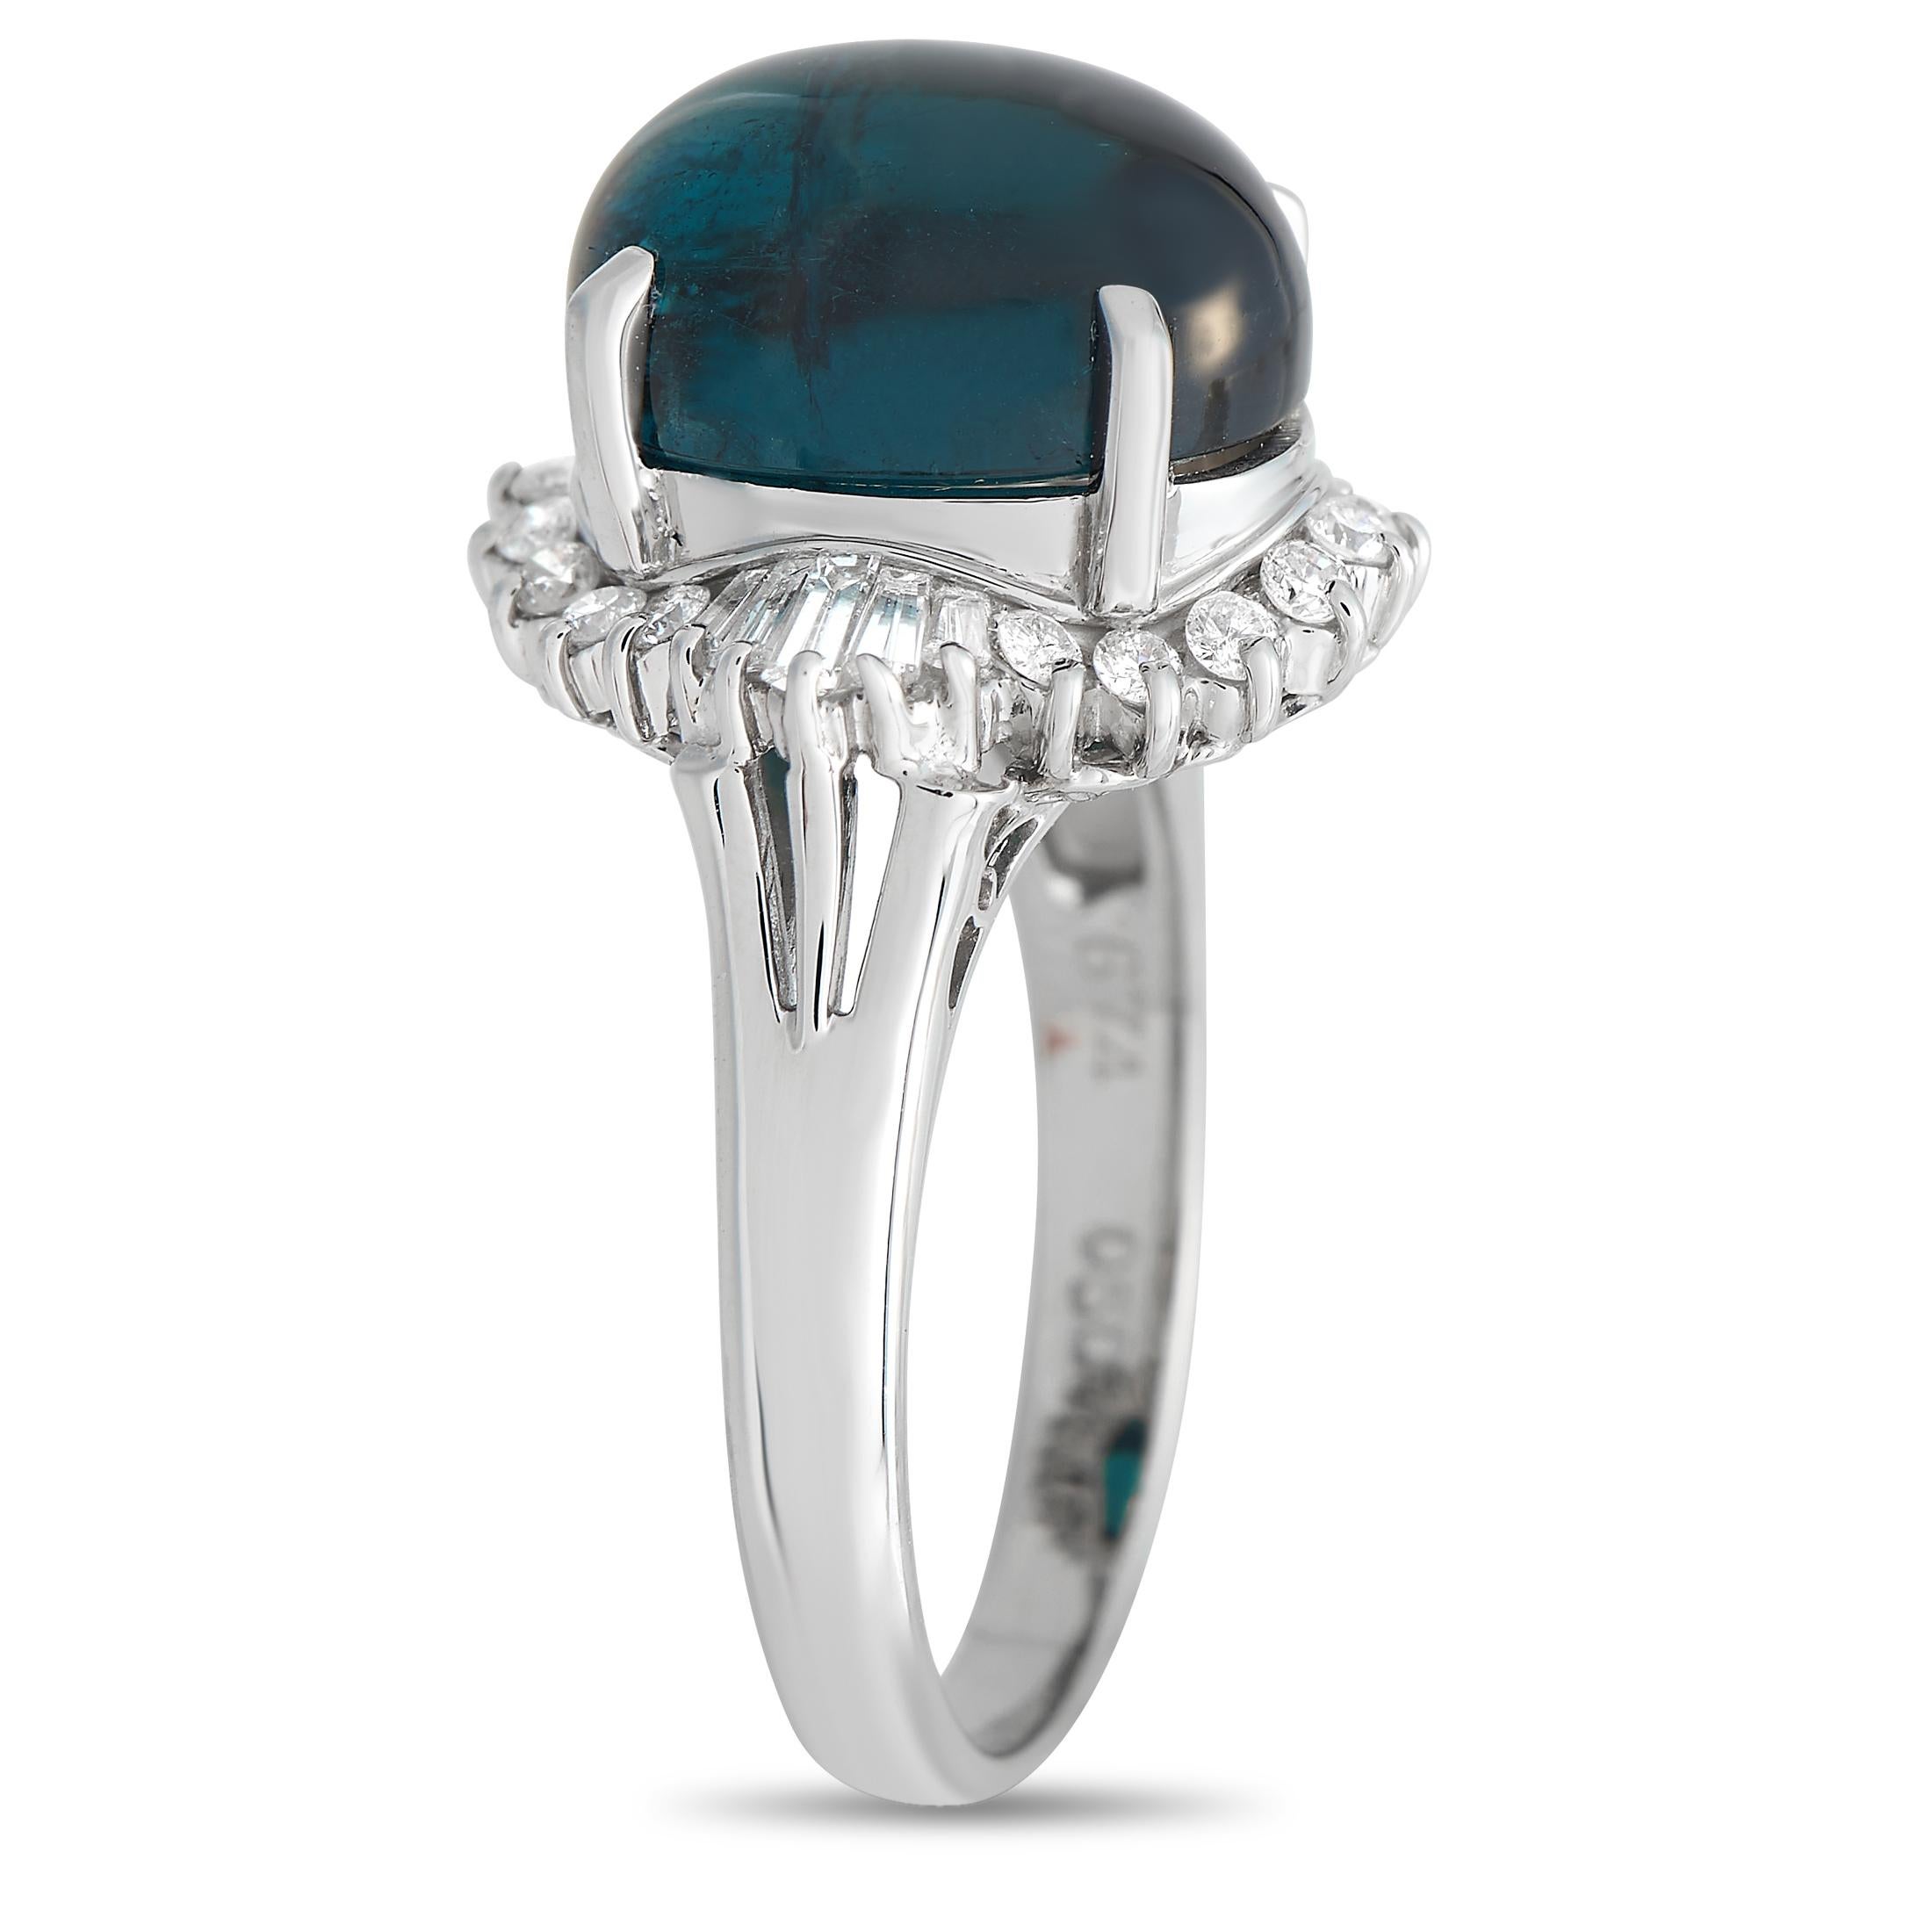 A captivating 6.74 carat Tourmaline cabochon stone makes this luxurious ring impossible to ignore. It\u2019s surrounded by a creative halo of sparkling diamonds, which together possess a total weight of 0.50 carats. Crafted from pure Platinum, this